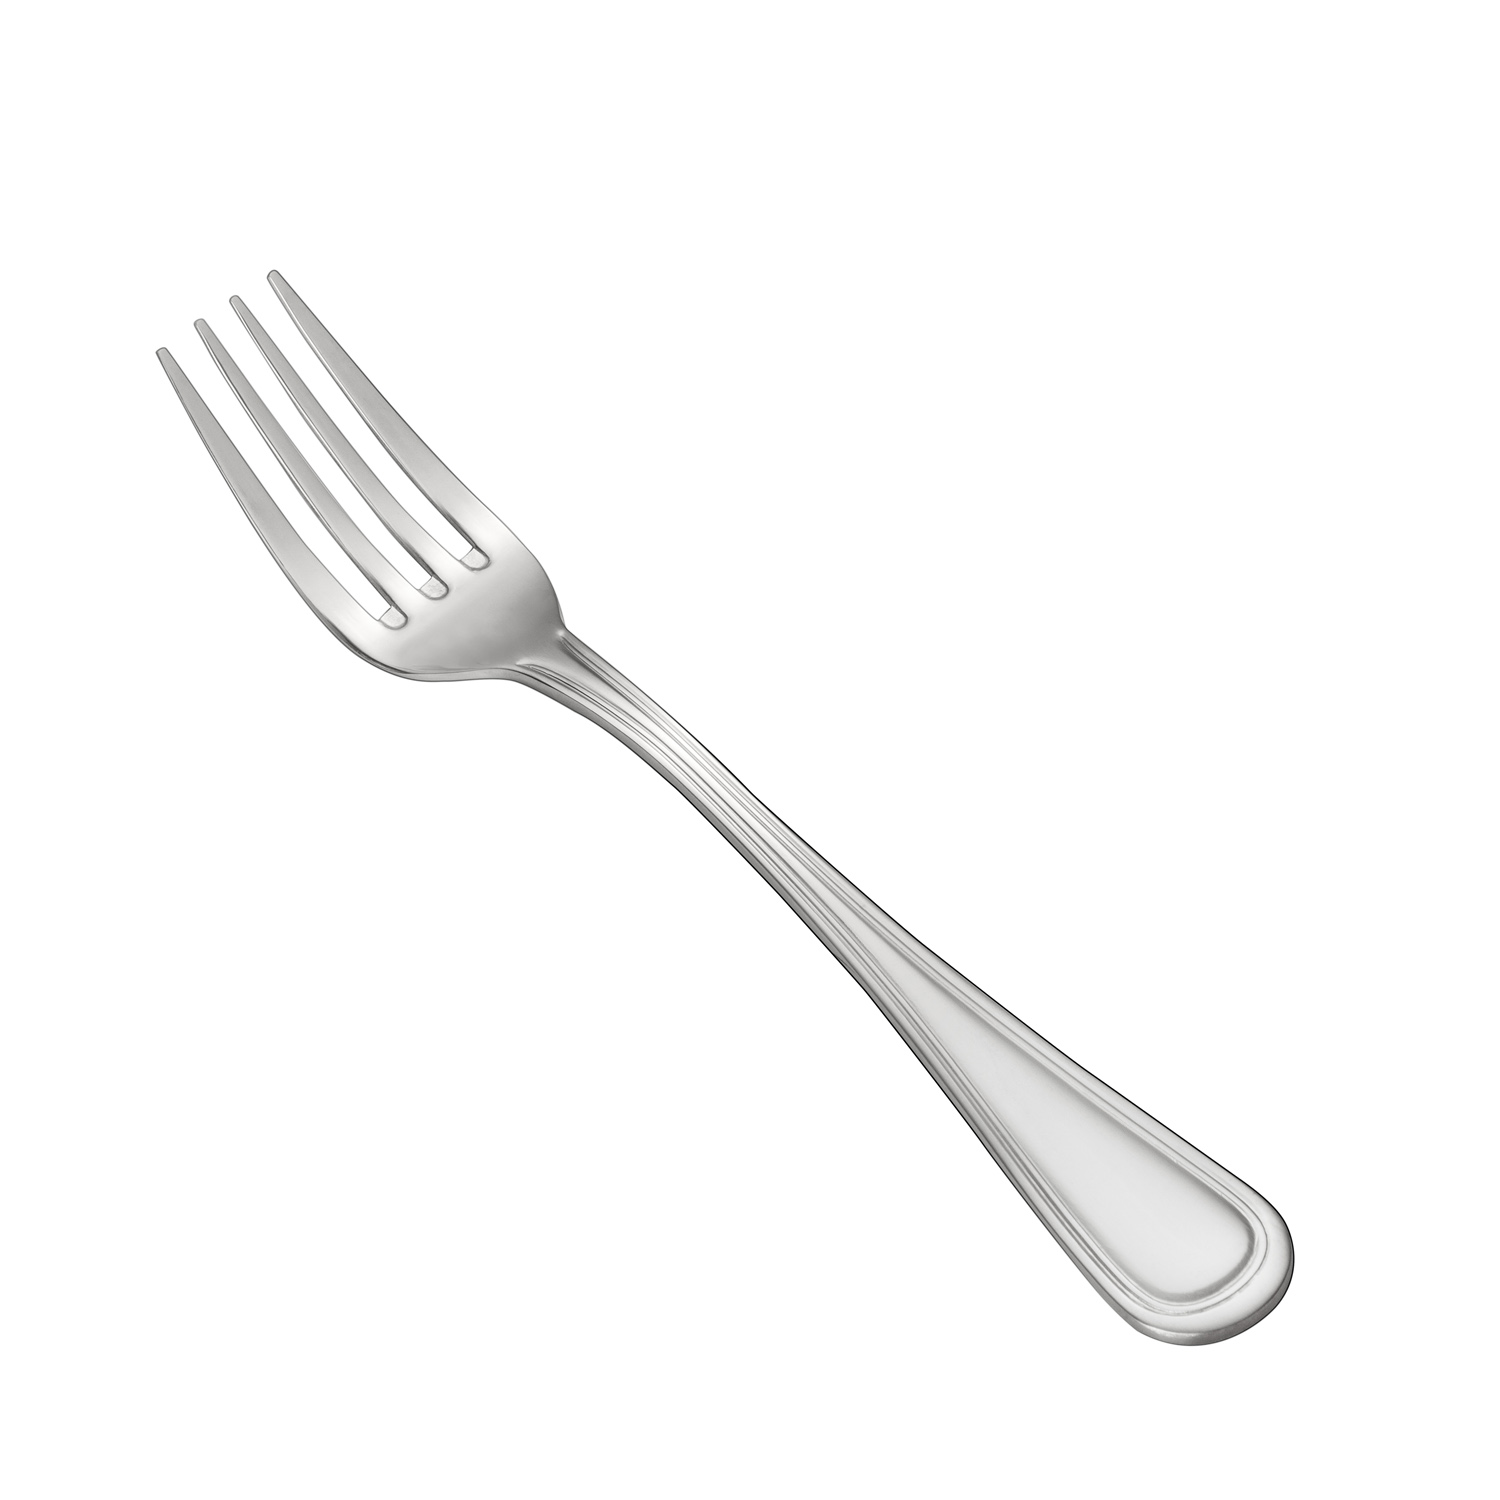 CAC China 3002-05 Prime Dinner Fork, Extra Heavyweight 18/0, 7 5/8"